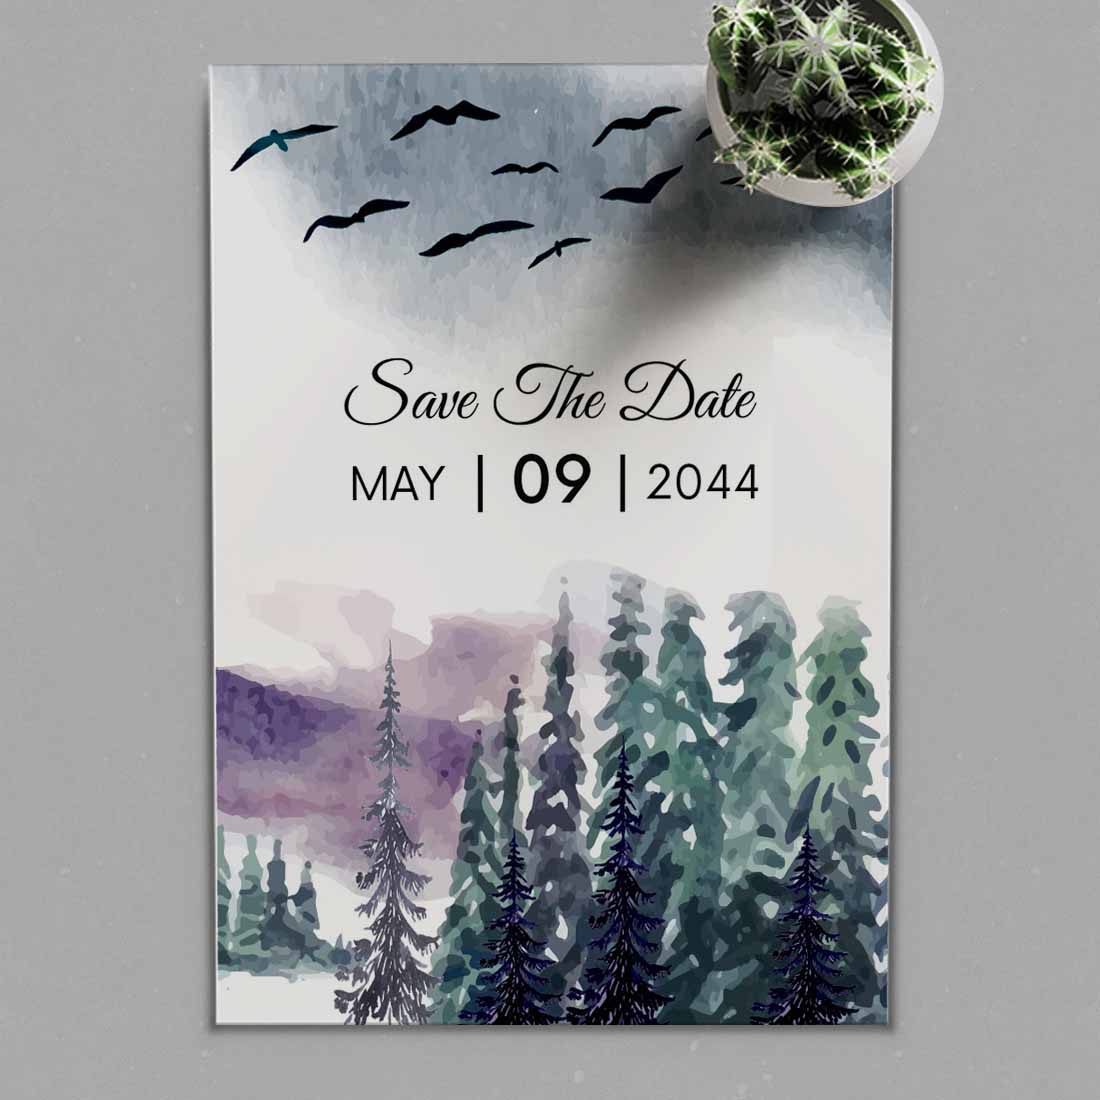 Winter Wedding Card With Pine Trees cover image.